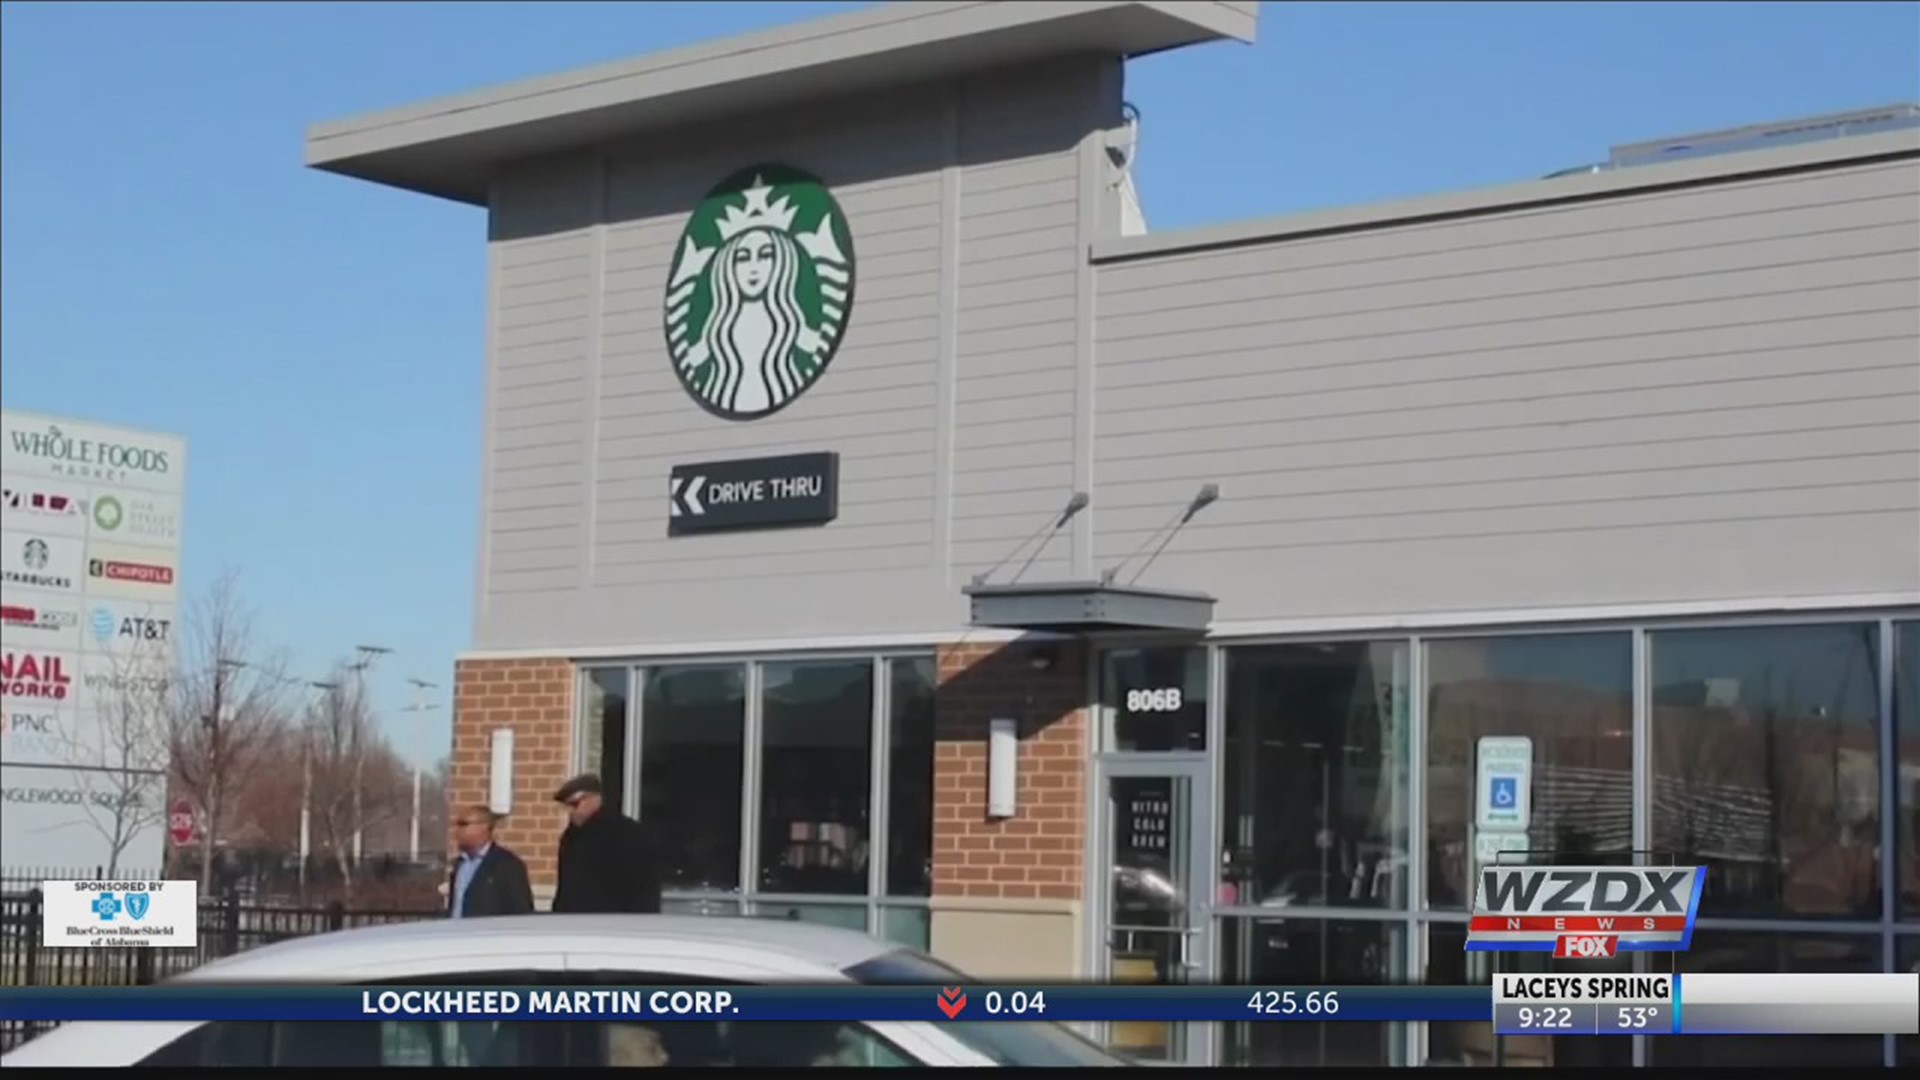 Starbucks is focusing on low-income areas.